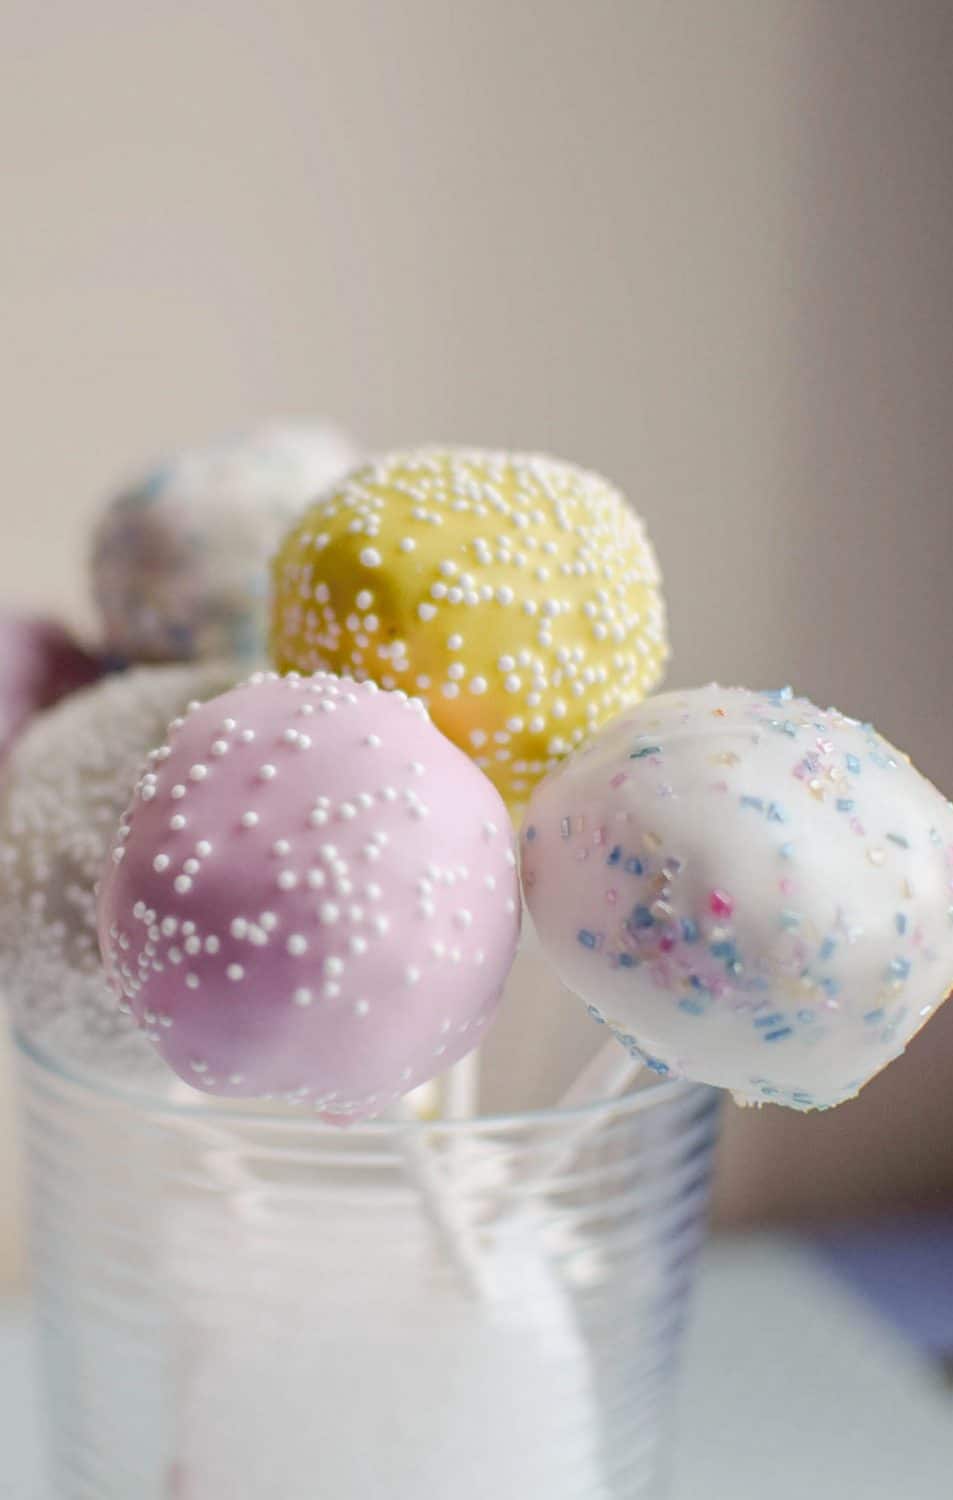 These Easter cake pops are the perfect treat for Eater. Coated in sweet white chocolate and sprinkles